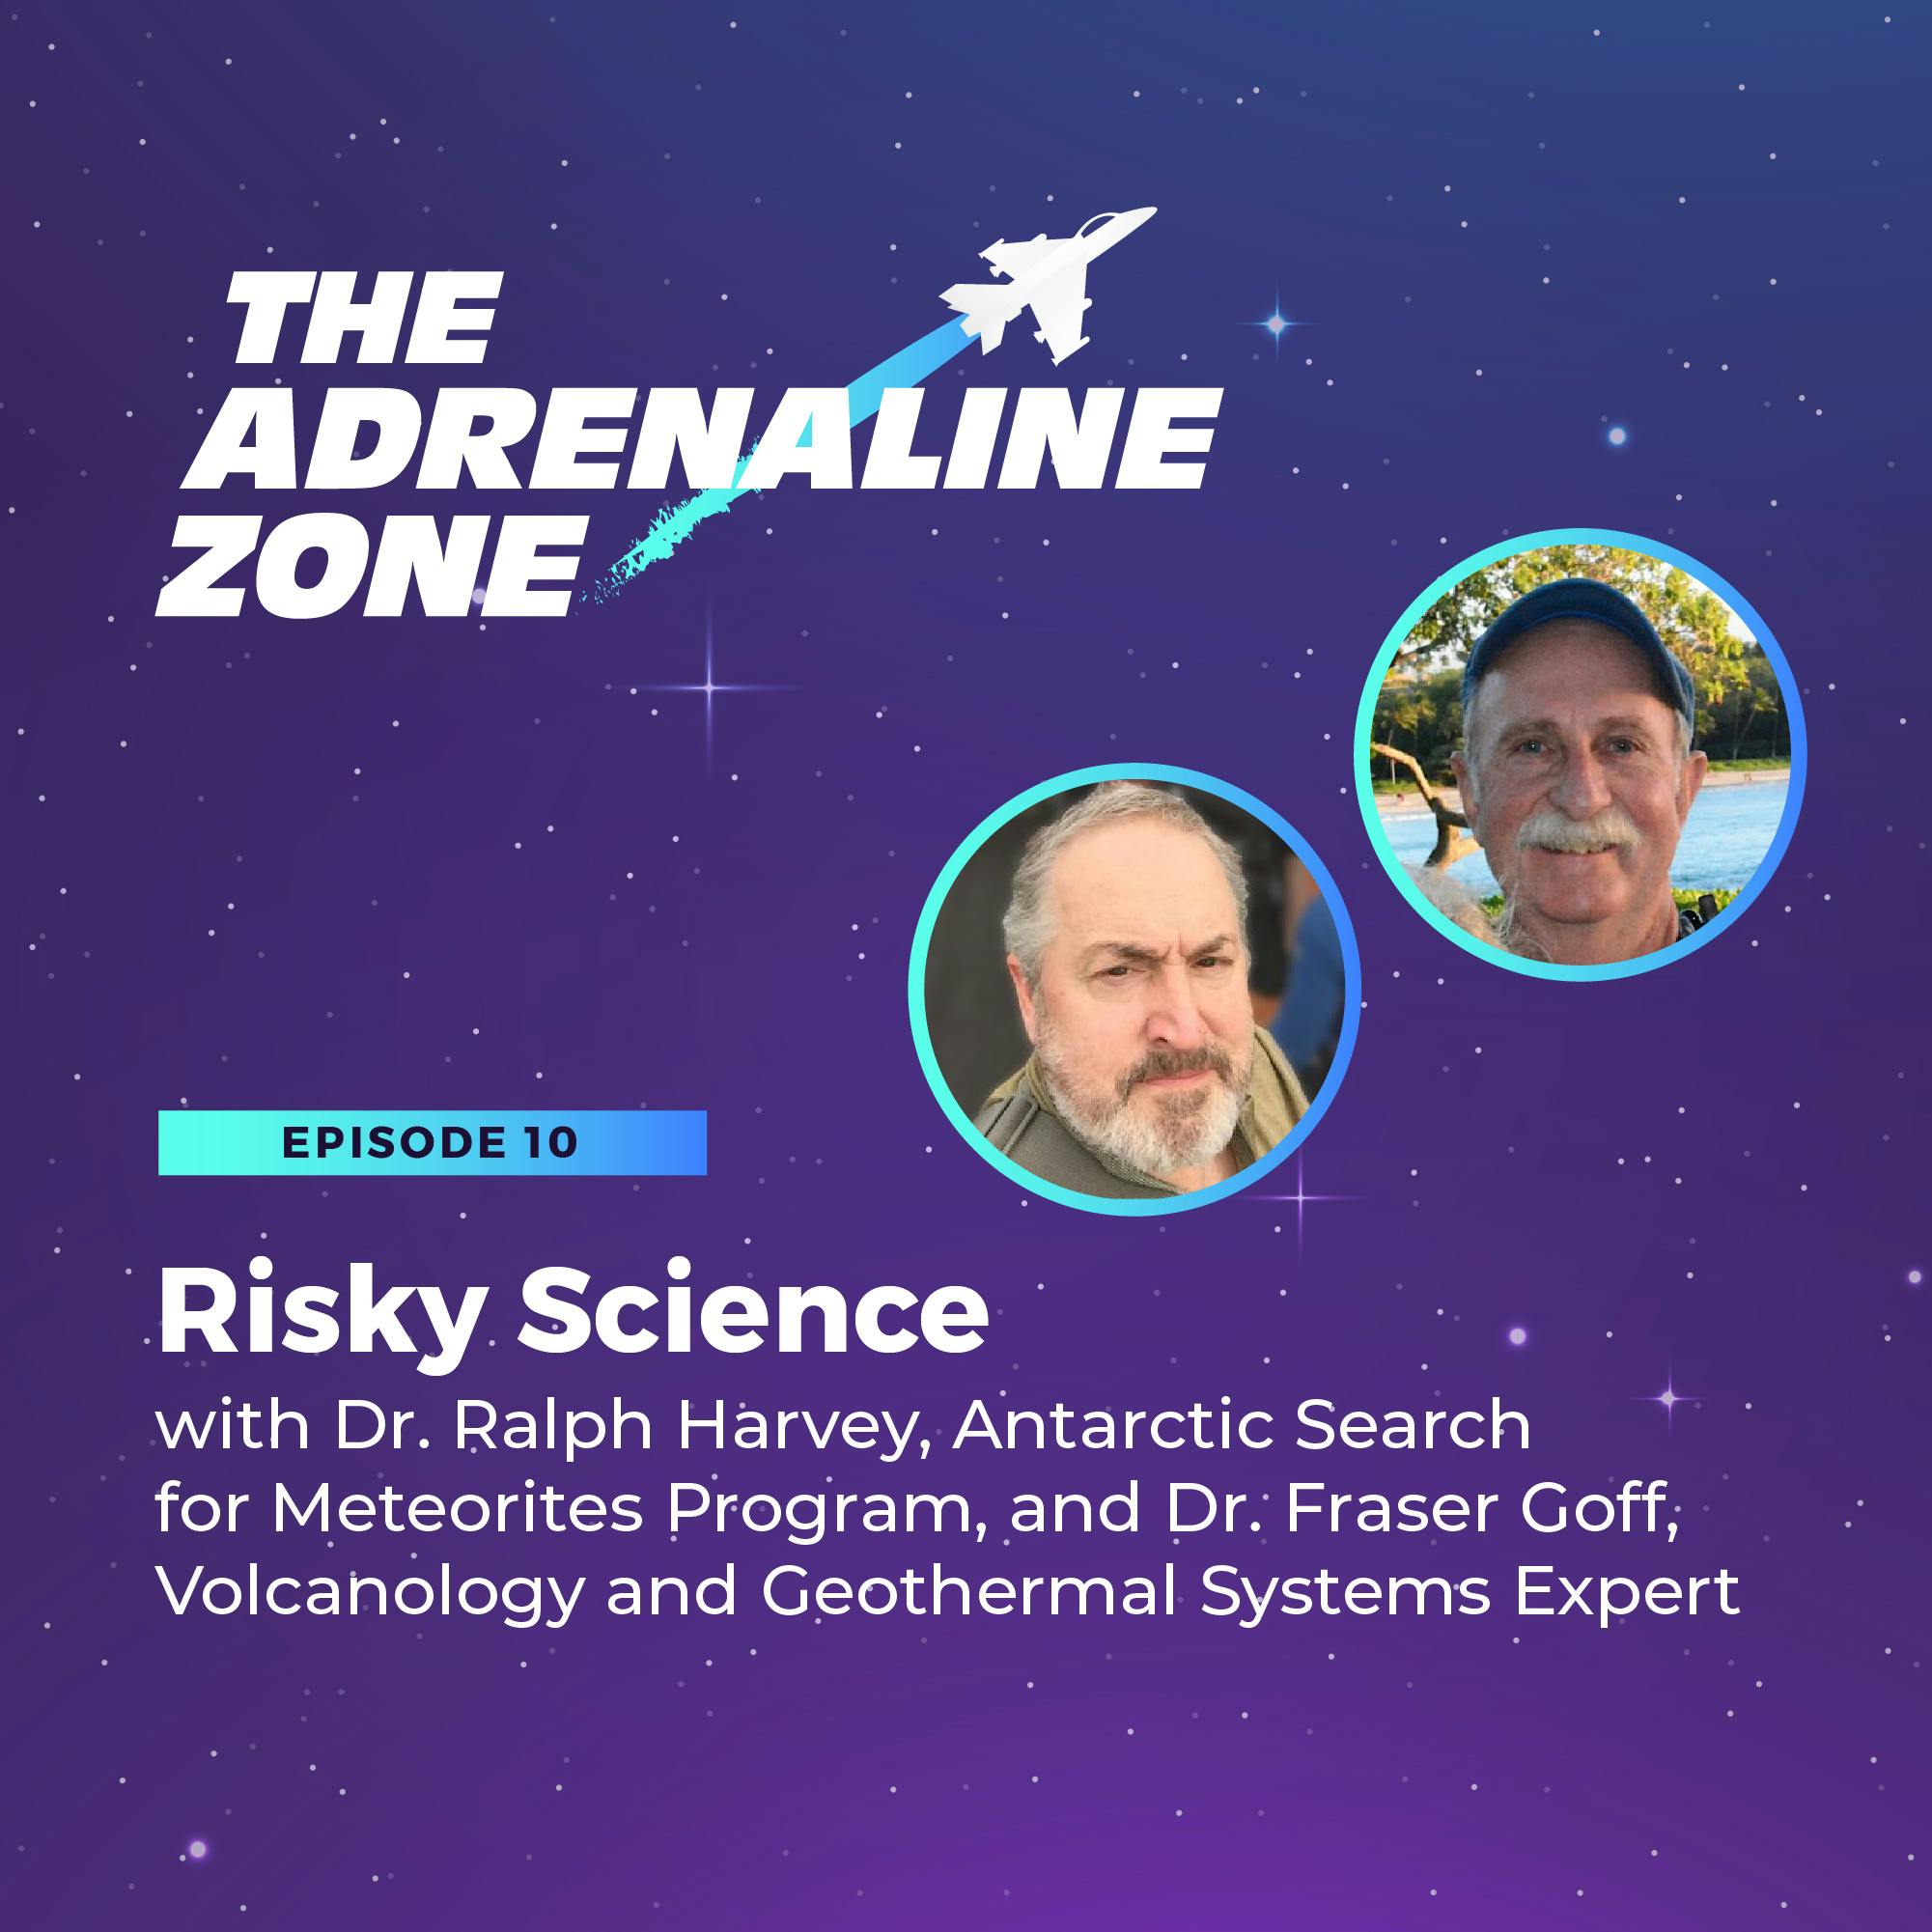 Risky Science with Dr. Ralph Harvey, Antarctic Search for Meteorites Program, and Dr. Fraser Goff, Volcanology and Geothermal Systems Expert